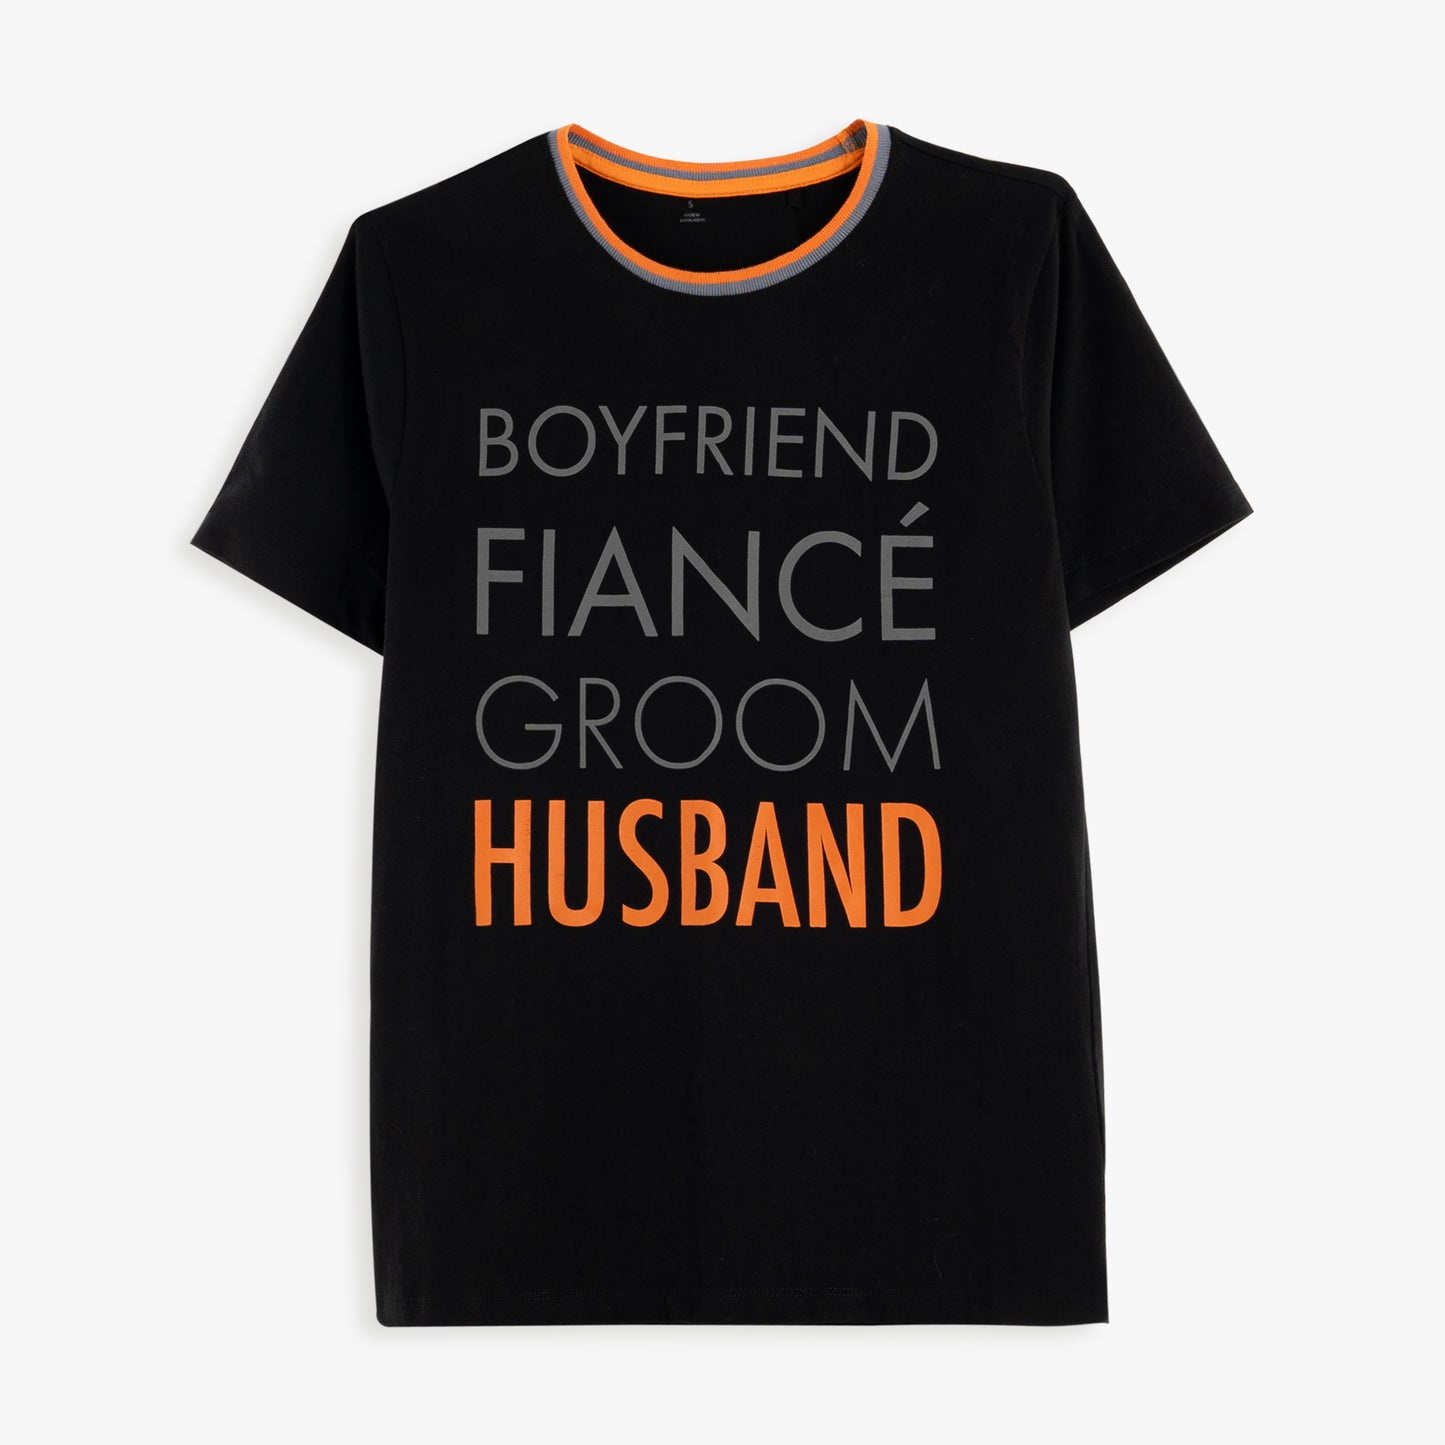 Ultra-soft 100% Cotton "Boyfriend to Husband" T-Shirt from the 10-in-1 Ultimate Groom Box.